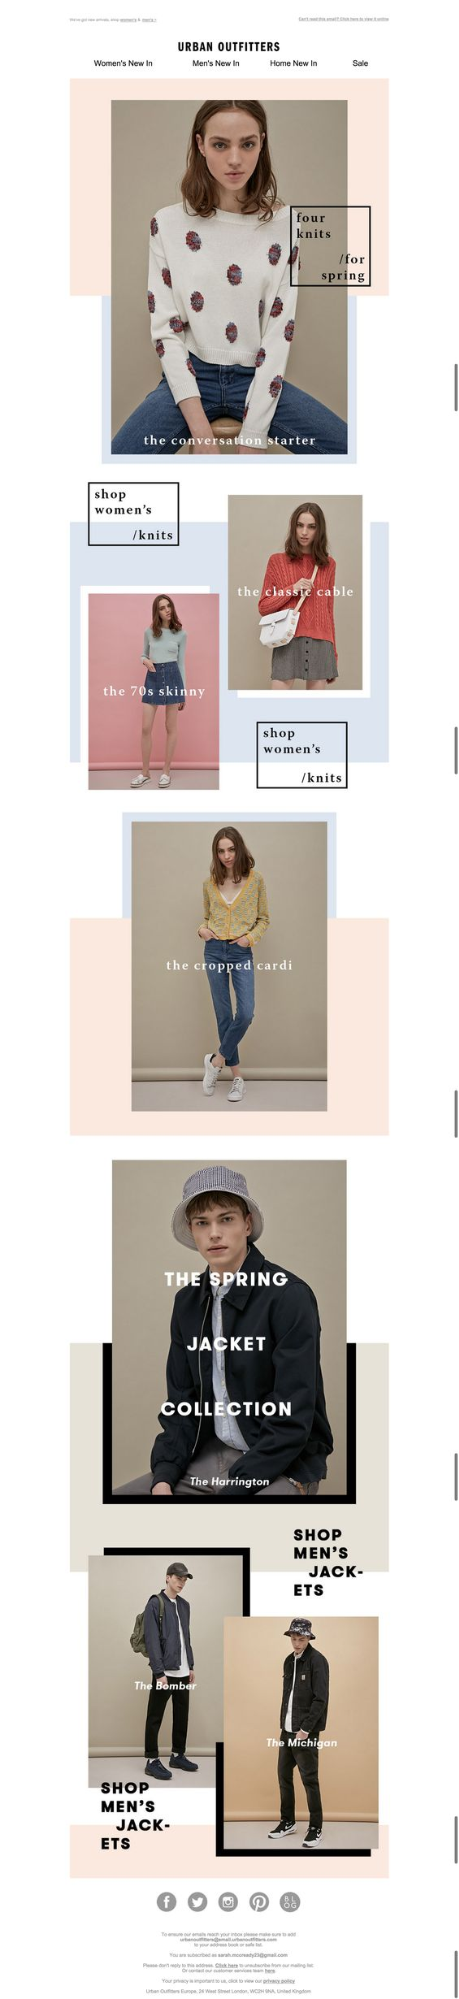 urban outfitters email marketing